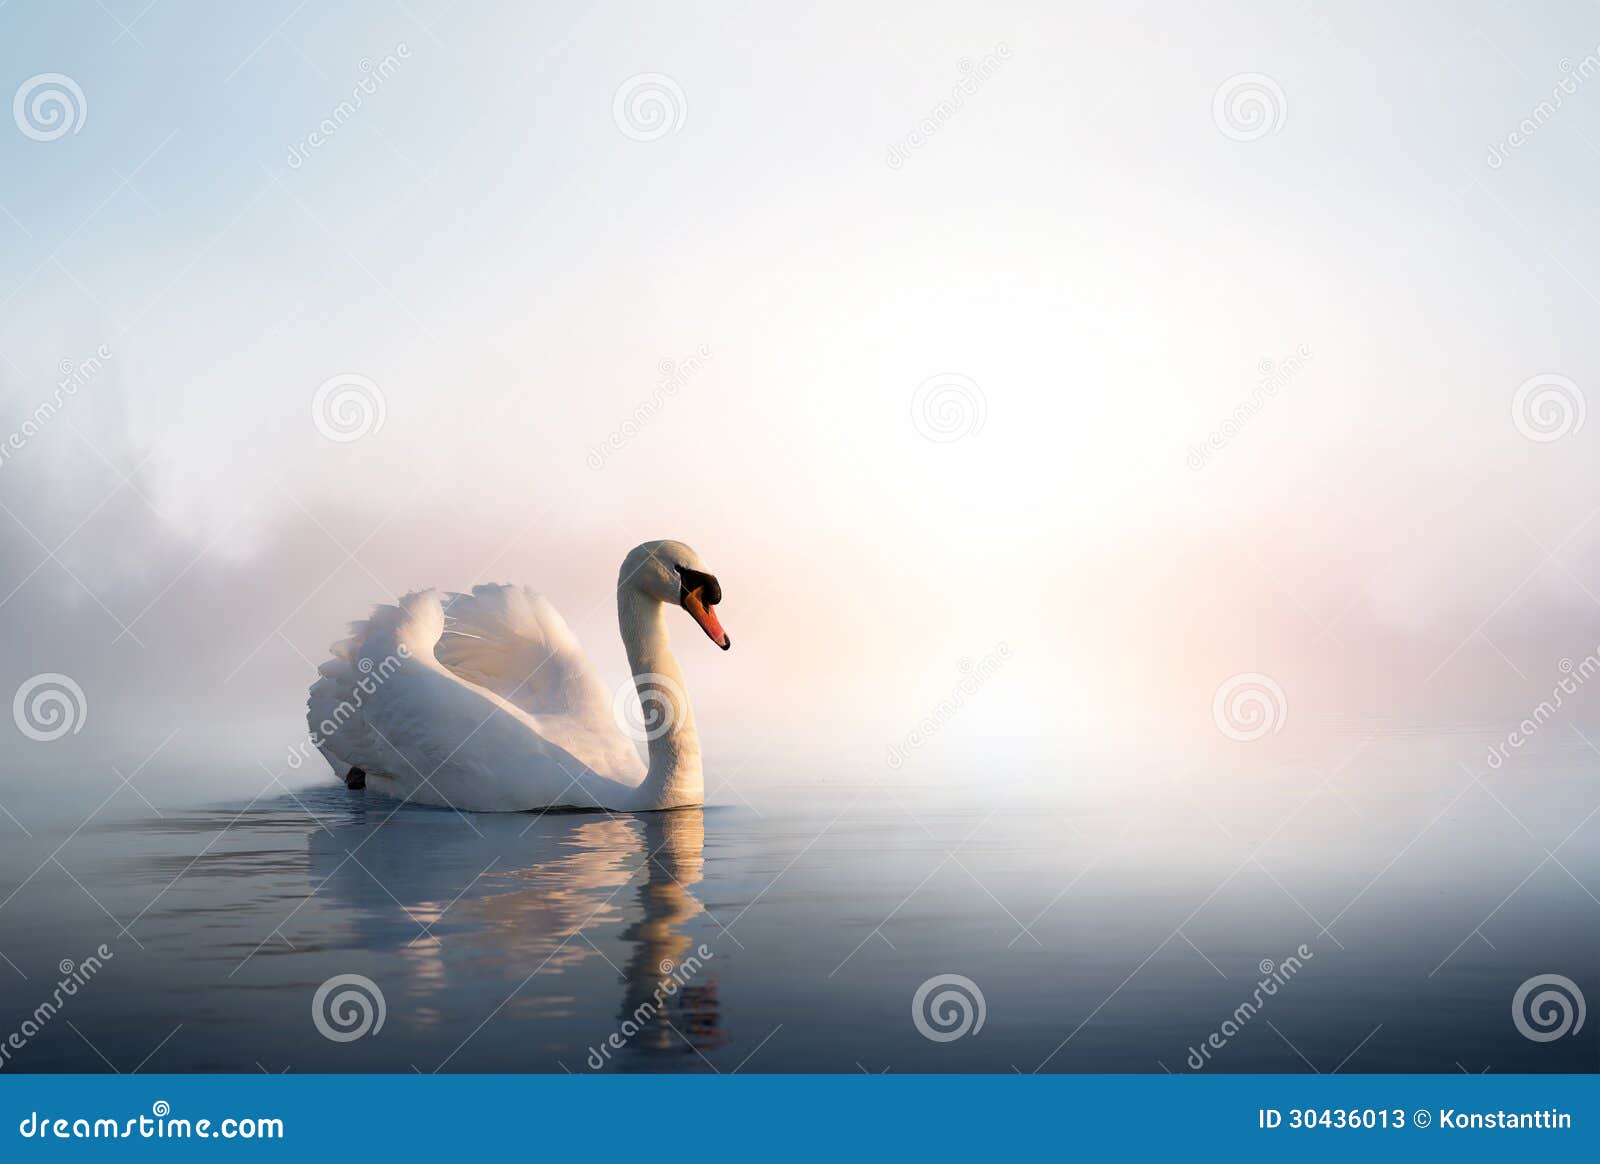 art swan floating on the water at sunrise of the day